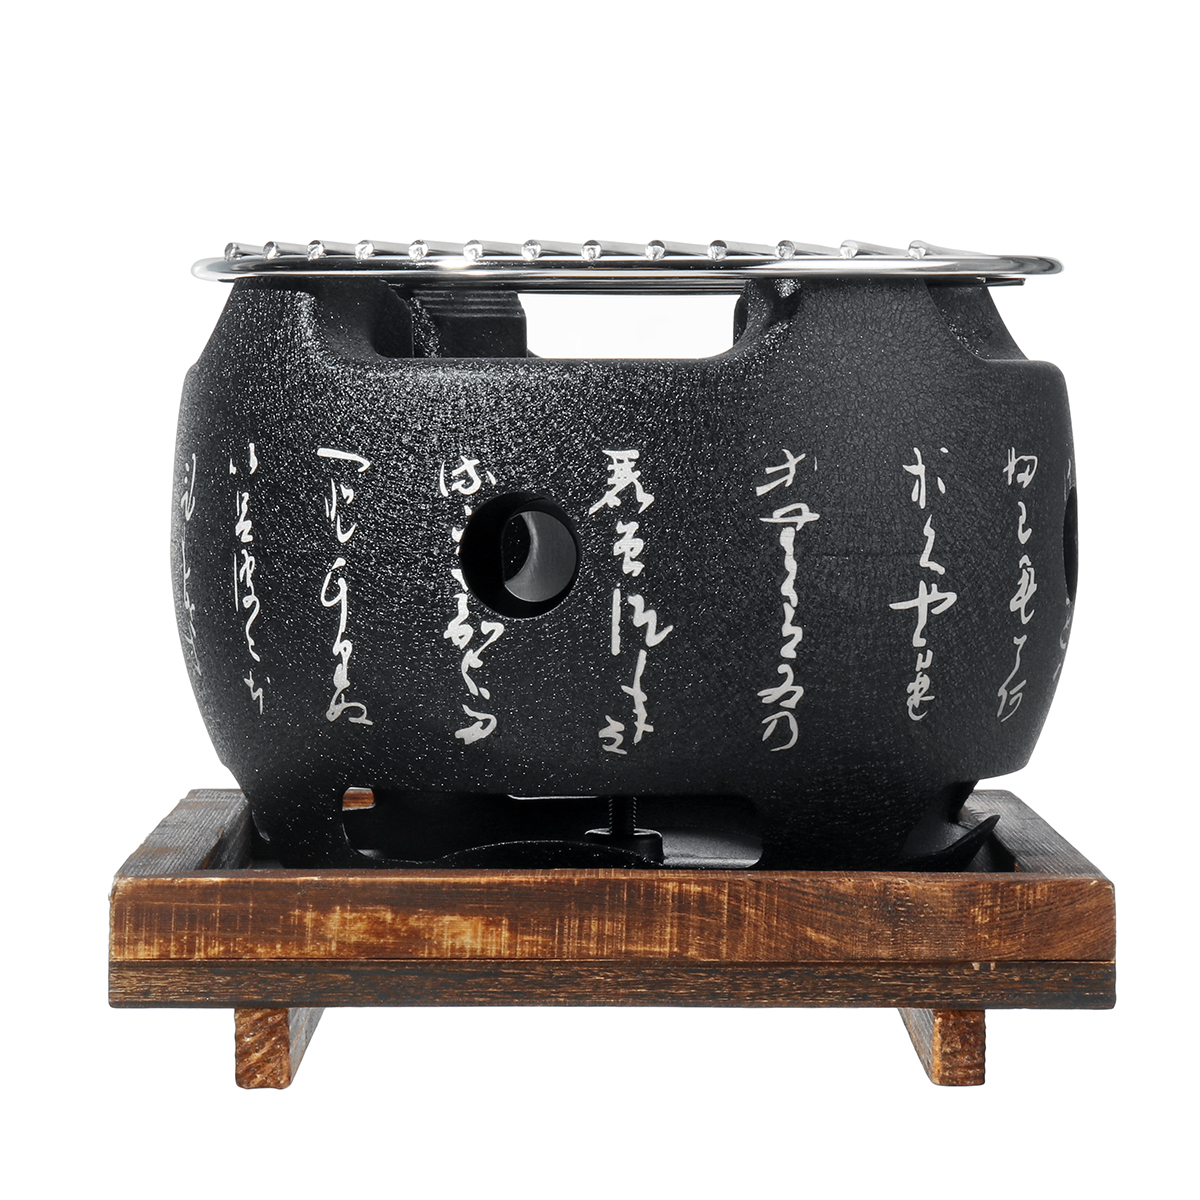 BBQ Grill Charcoal Grill Japanese Style Aluminium Alloy Portable Barbecue eddiestore2008 - image 3 of 11